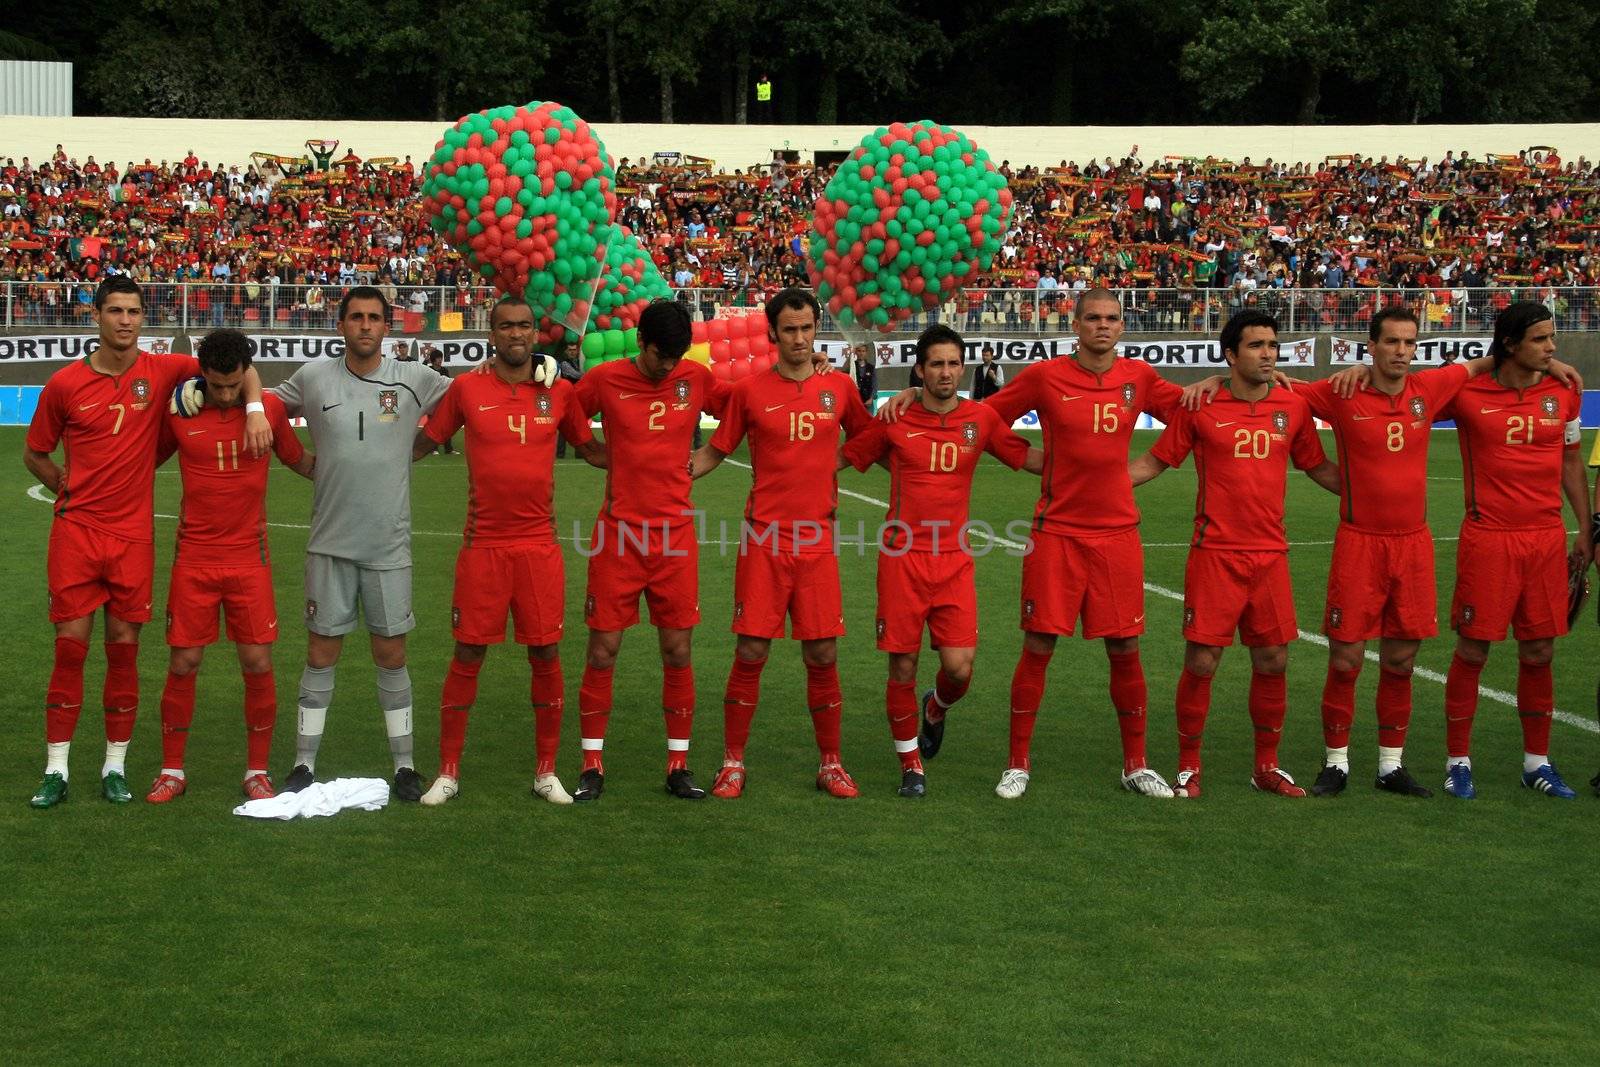 Portugal Euro 2008 EDITORIAL USE ONLY